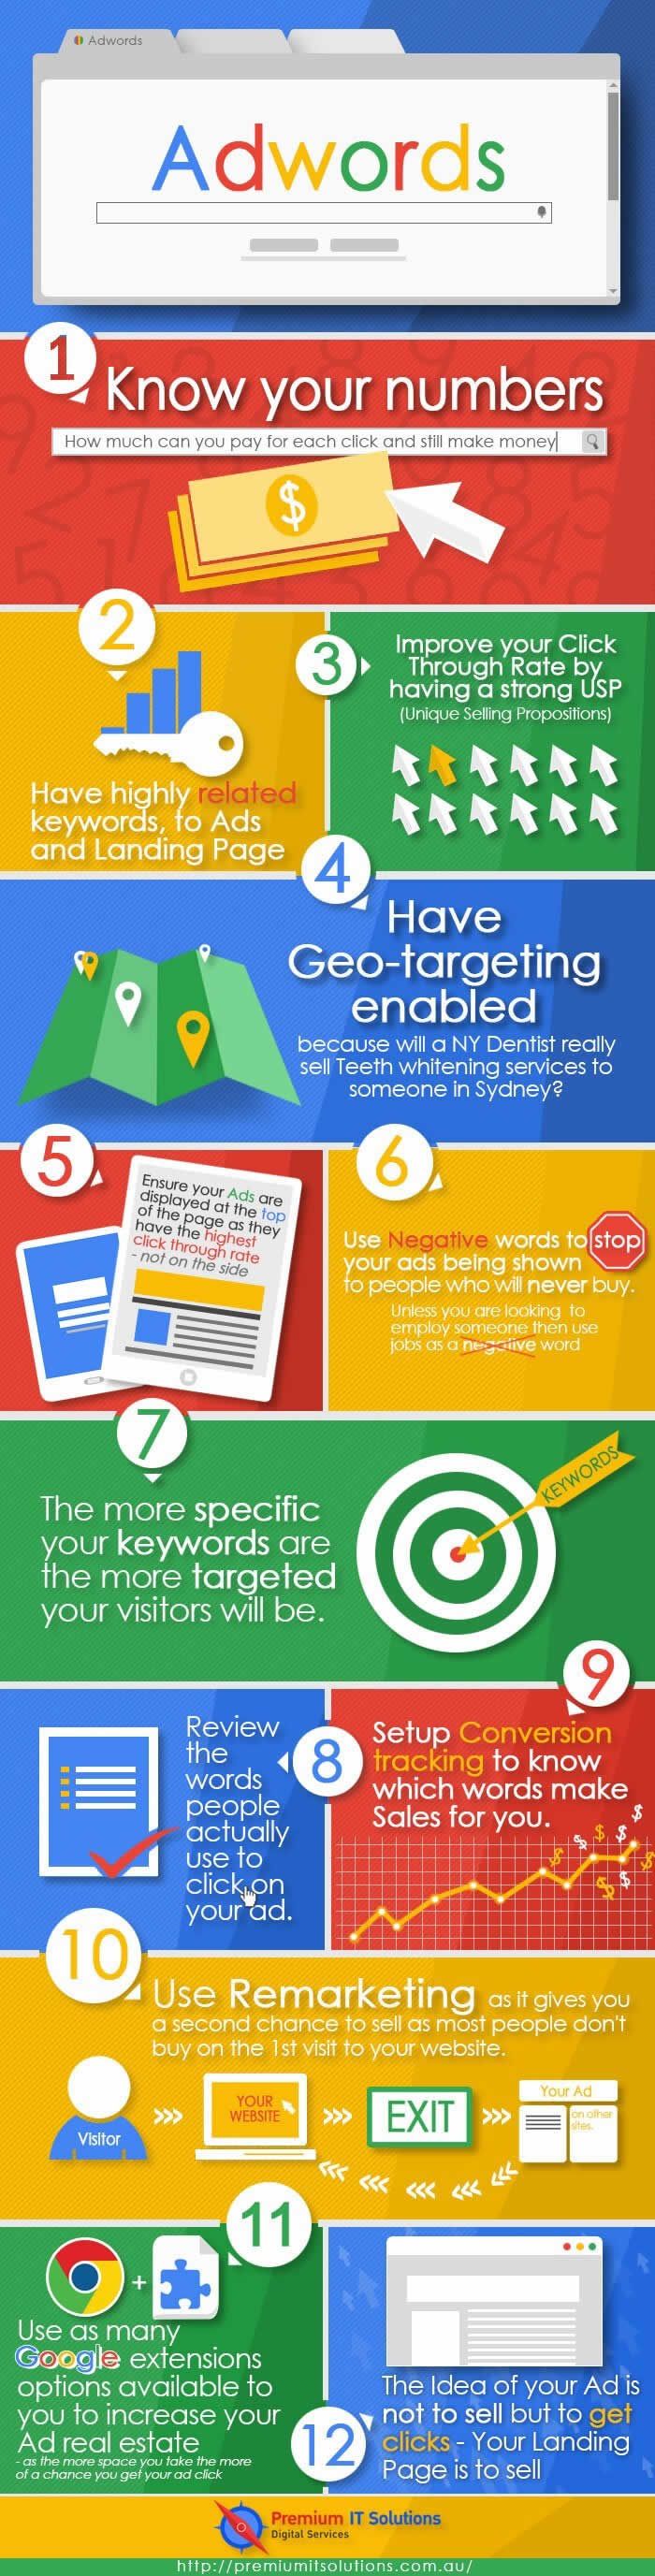 Adwords infographie